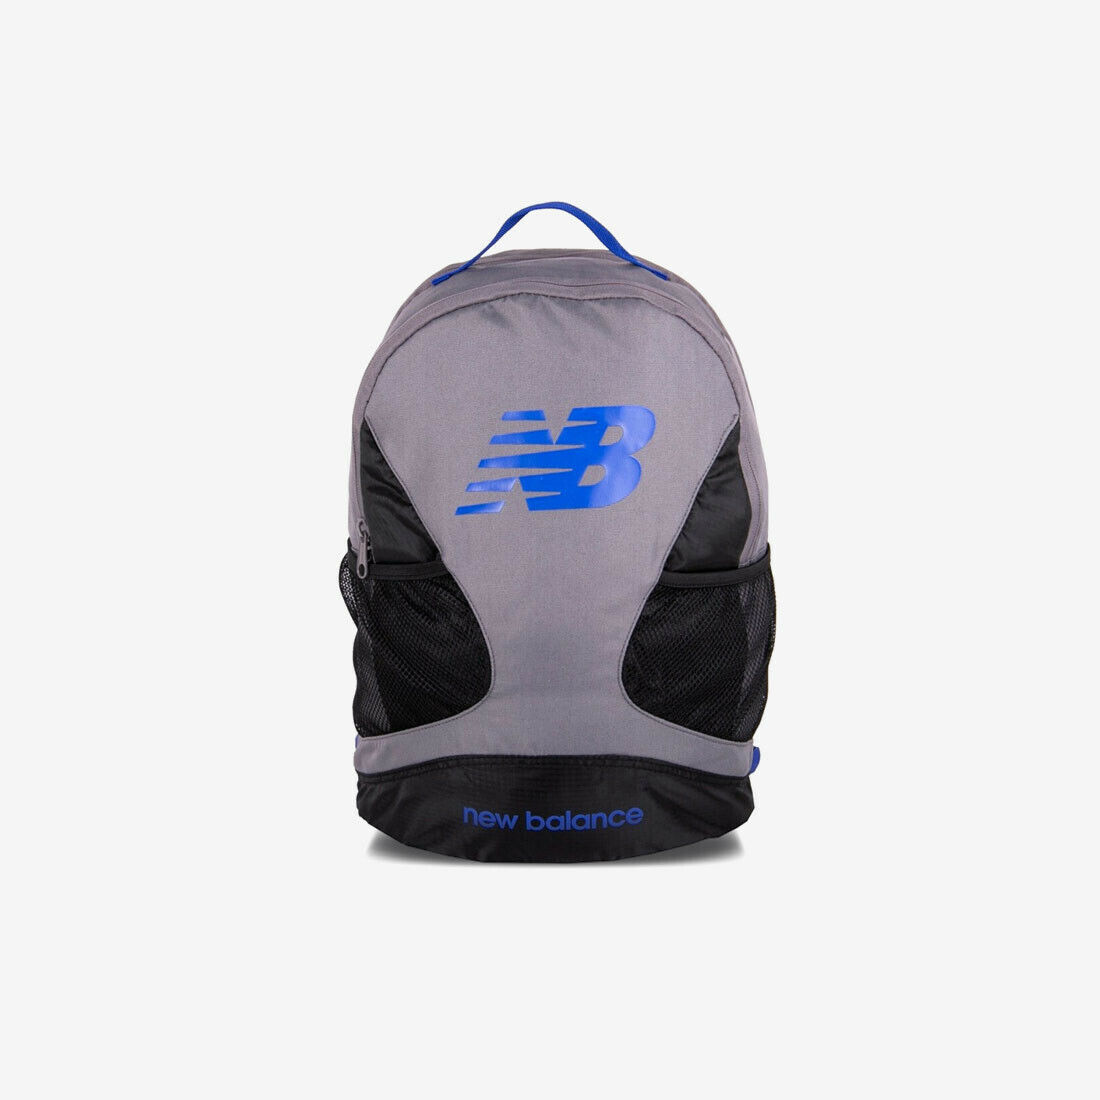 New Balance Players Backpack Dual Compartment Bag with Padded Laptop Sleeve NWT